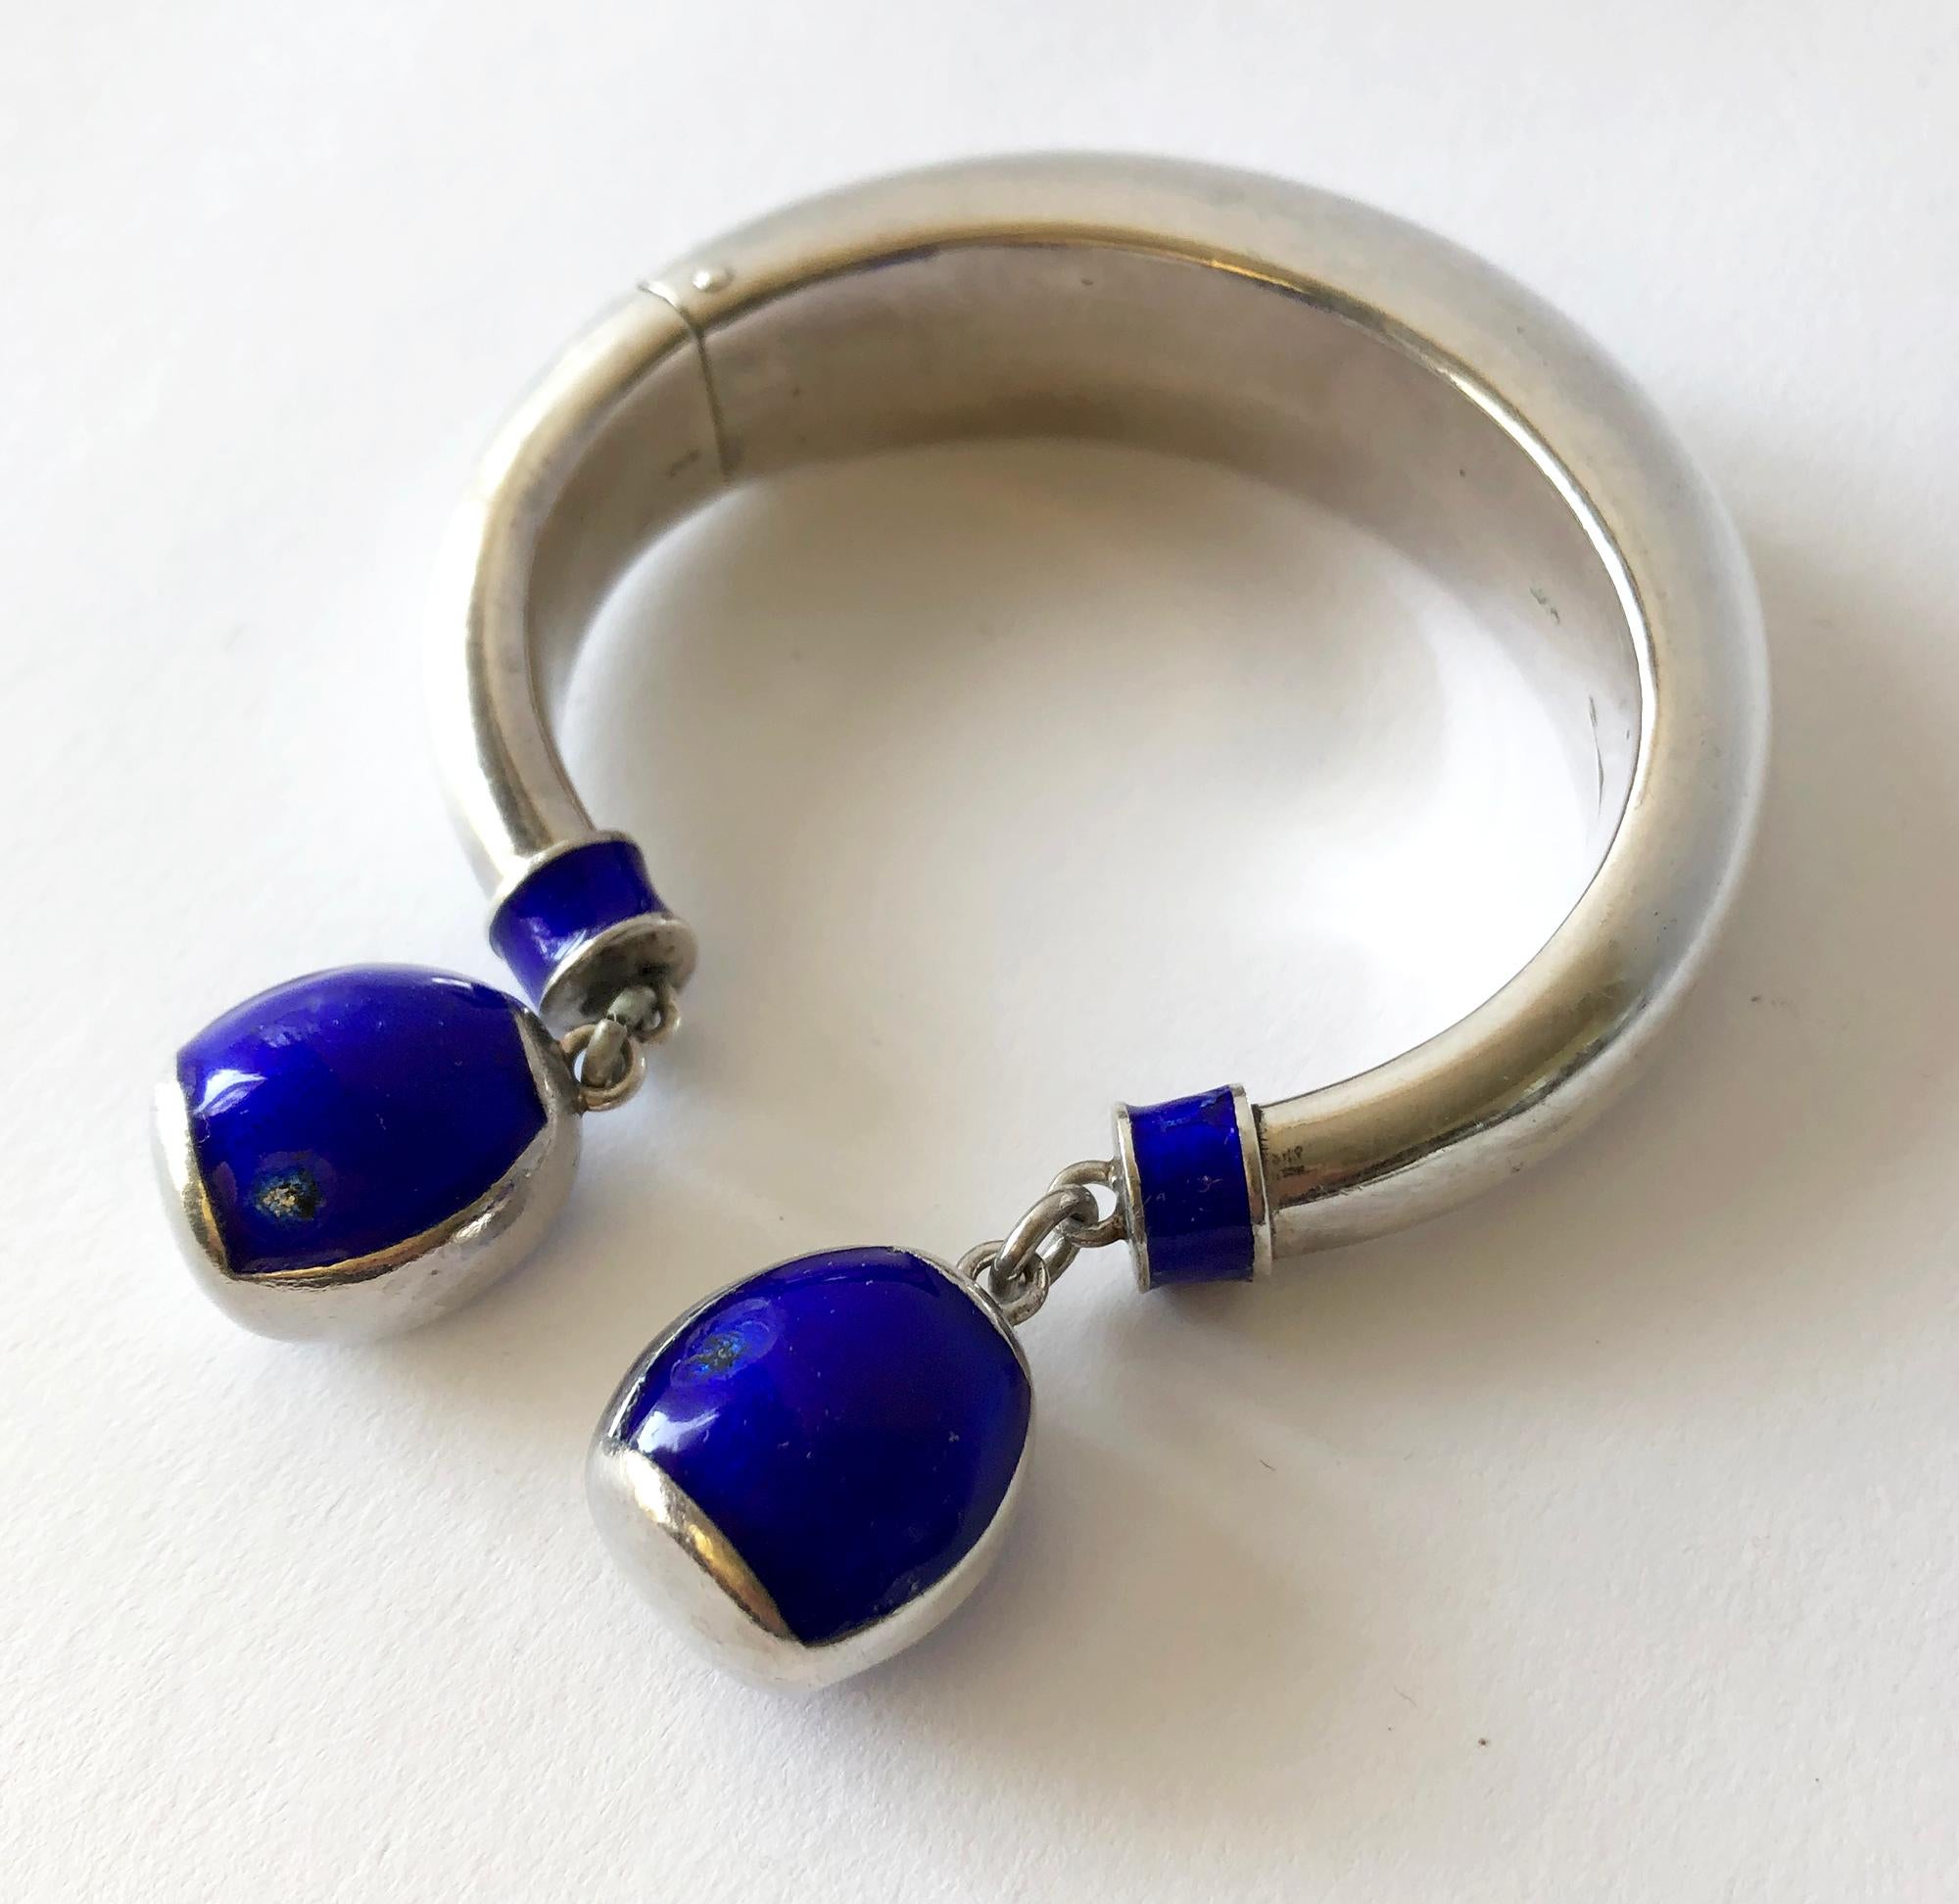 Vintage sterling silver and enamel hinged bracelet created by Gucci, circa 1960's.  Bracelet has a 7 1/4